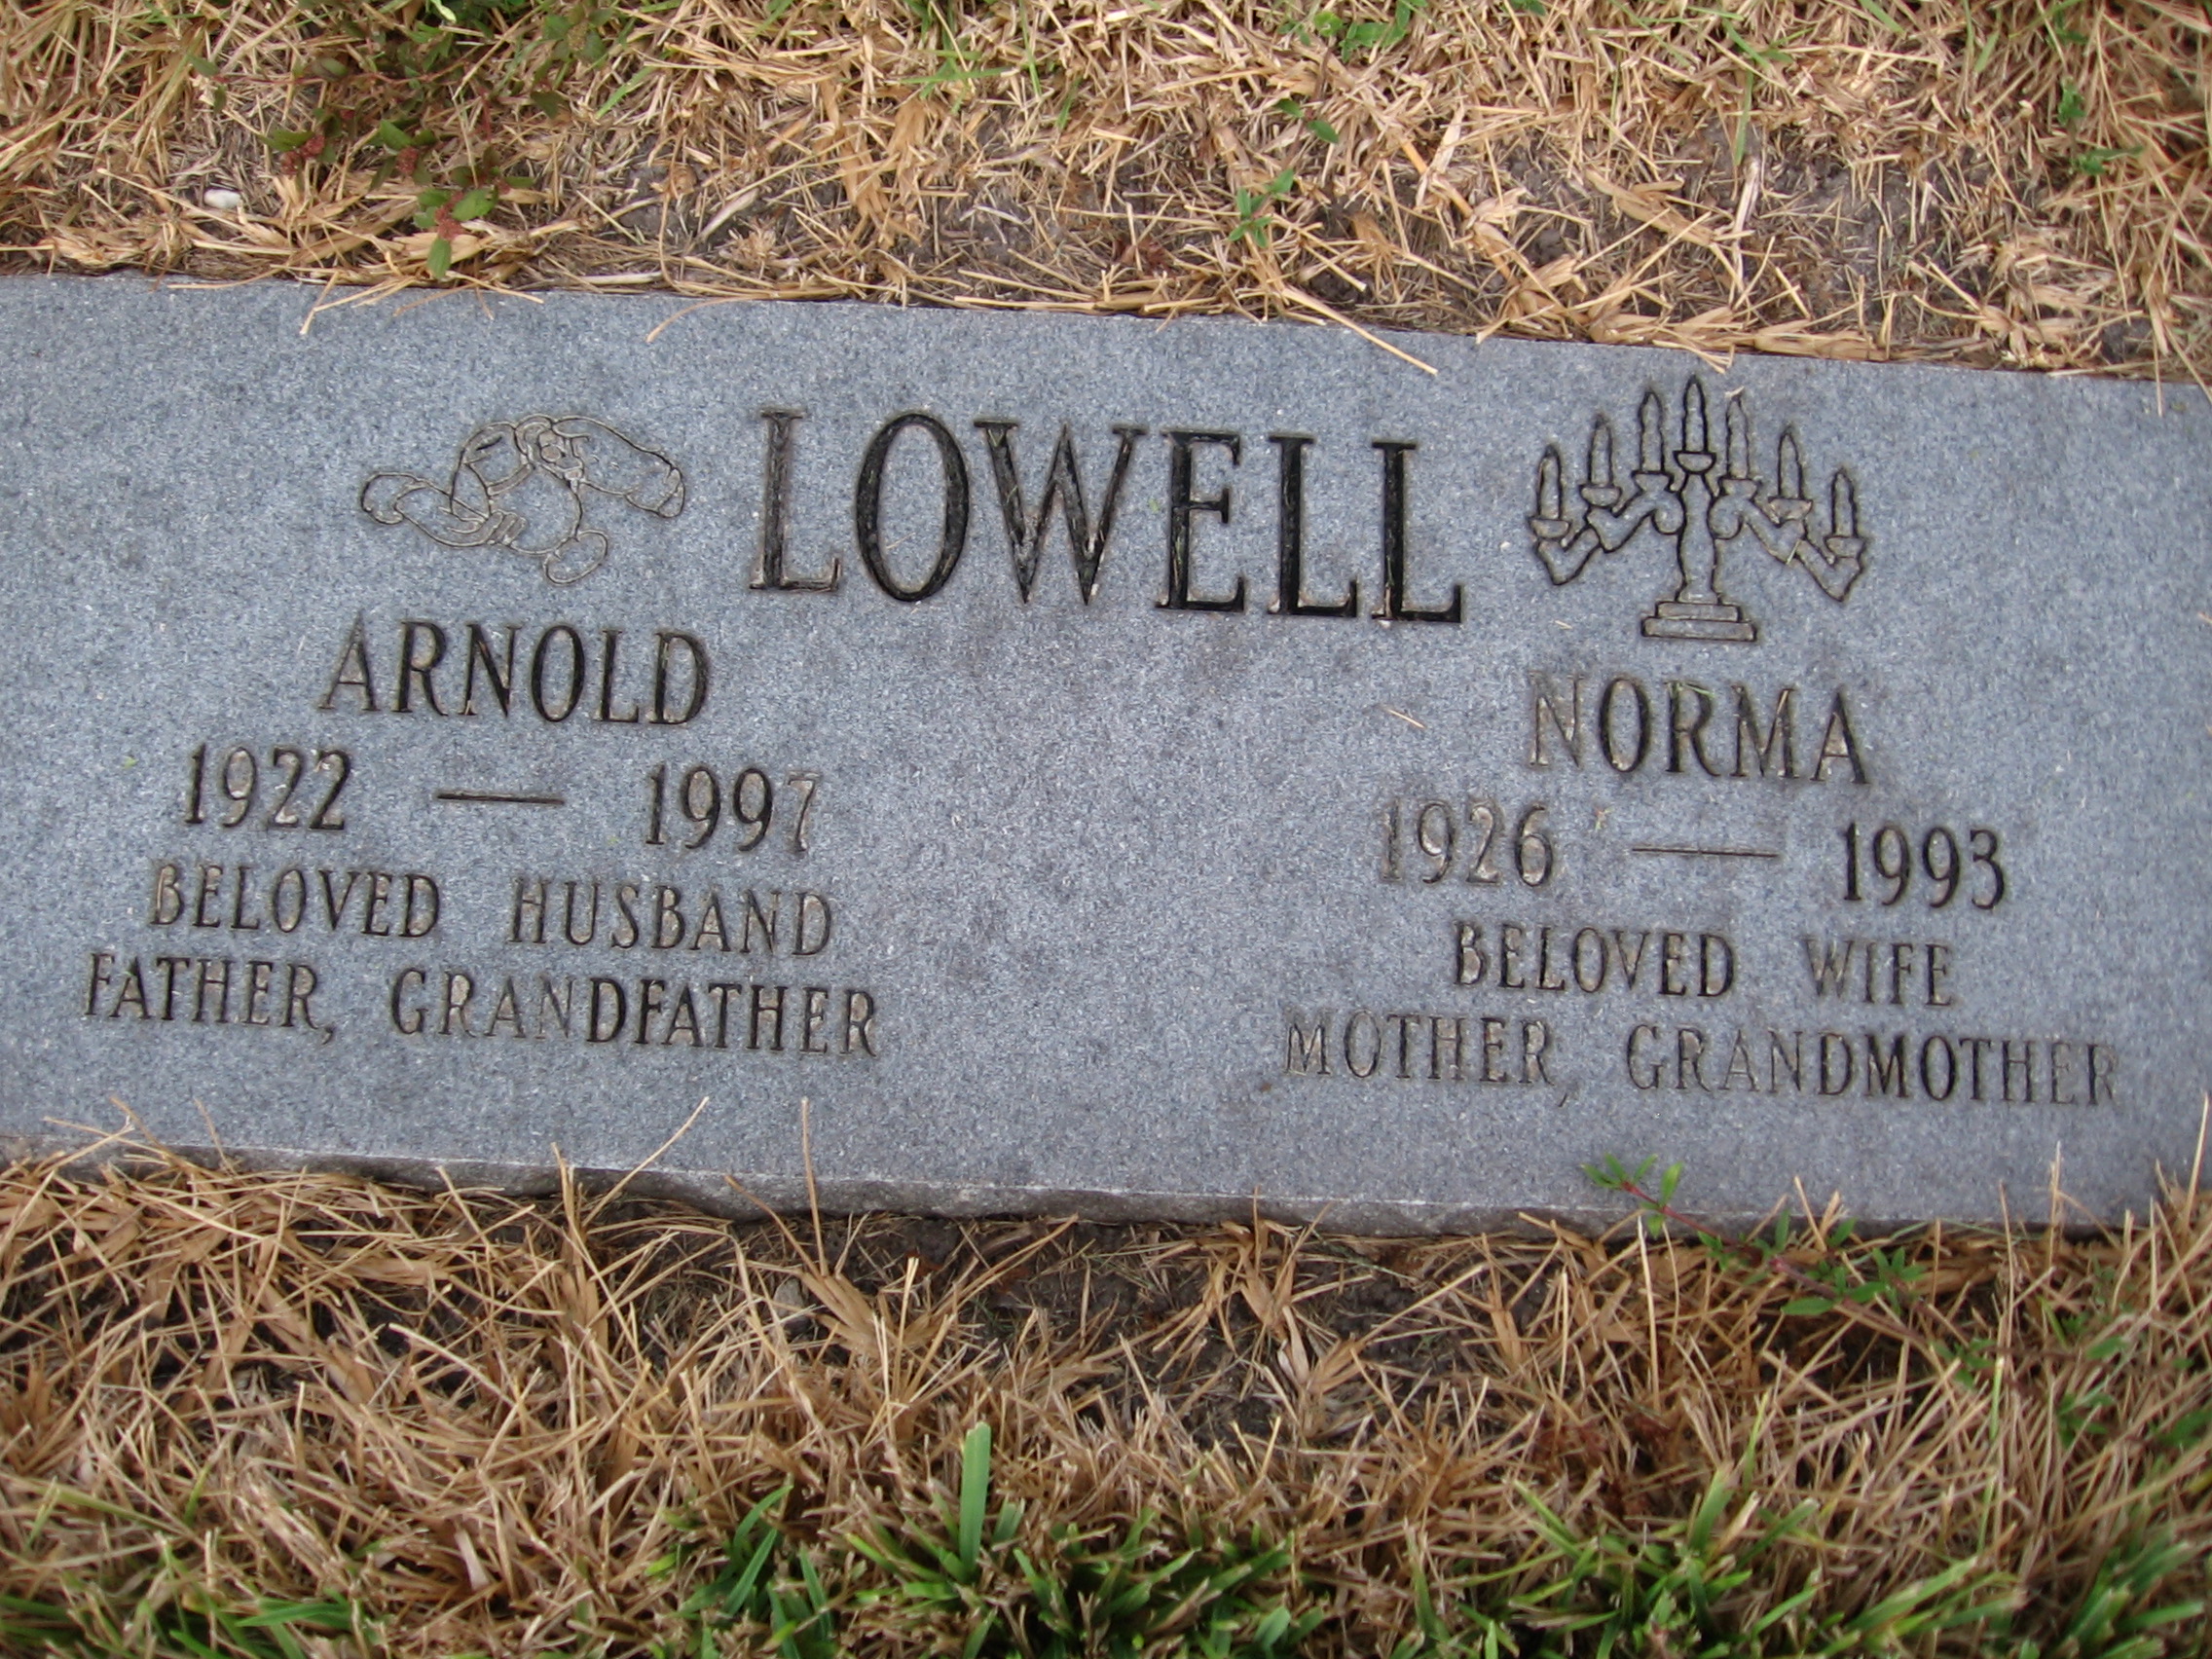 Norma Lowell